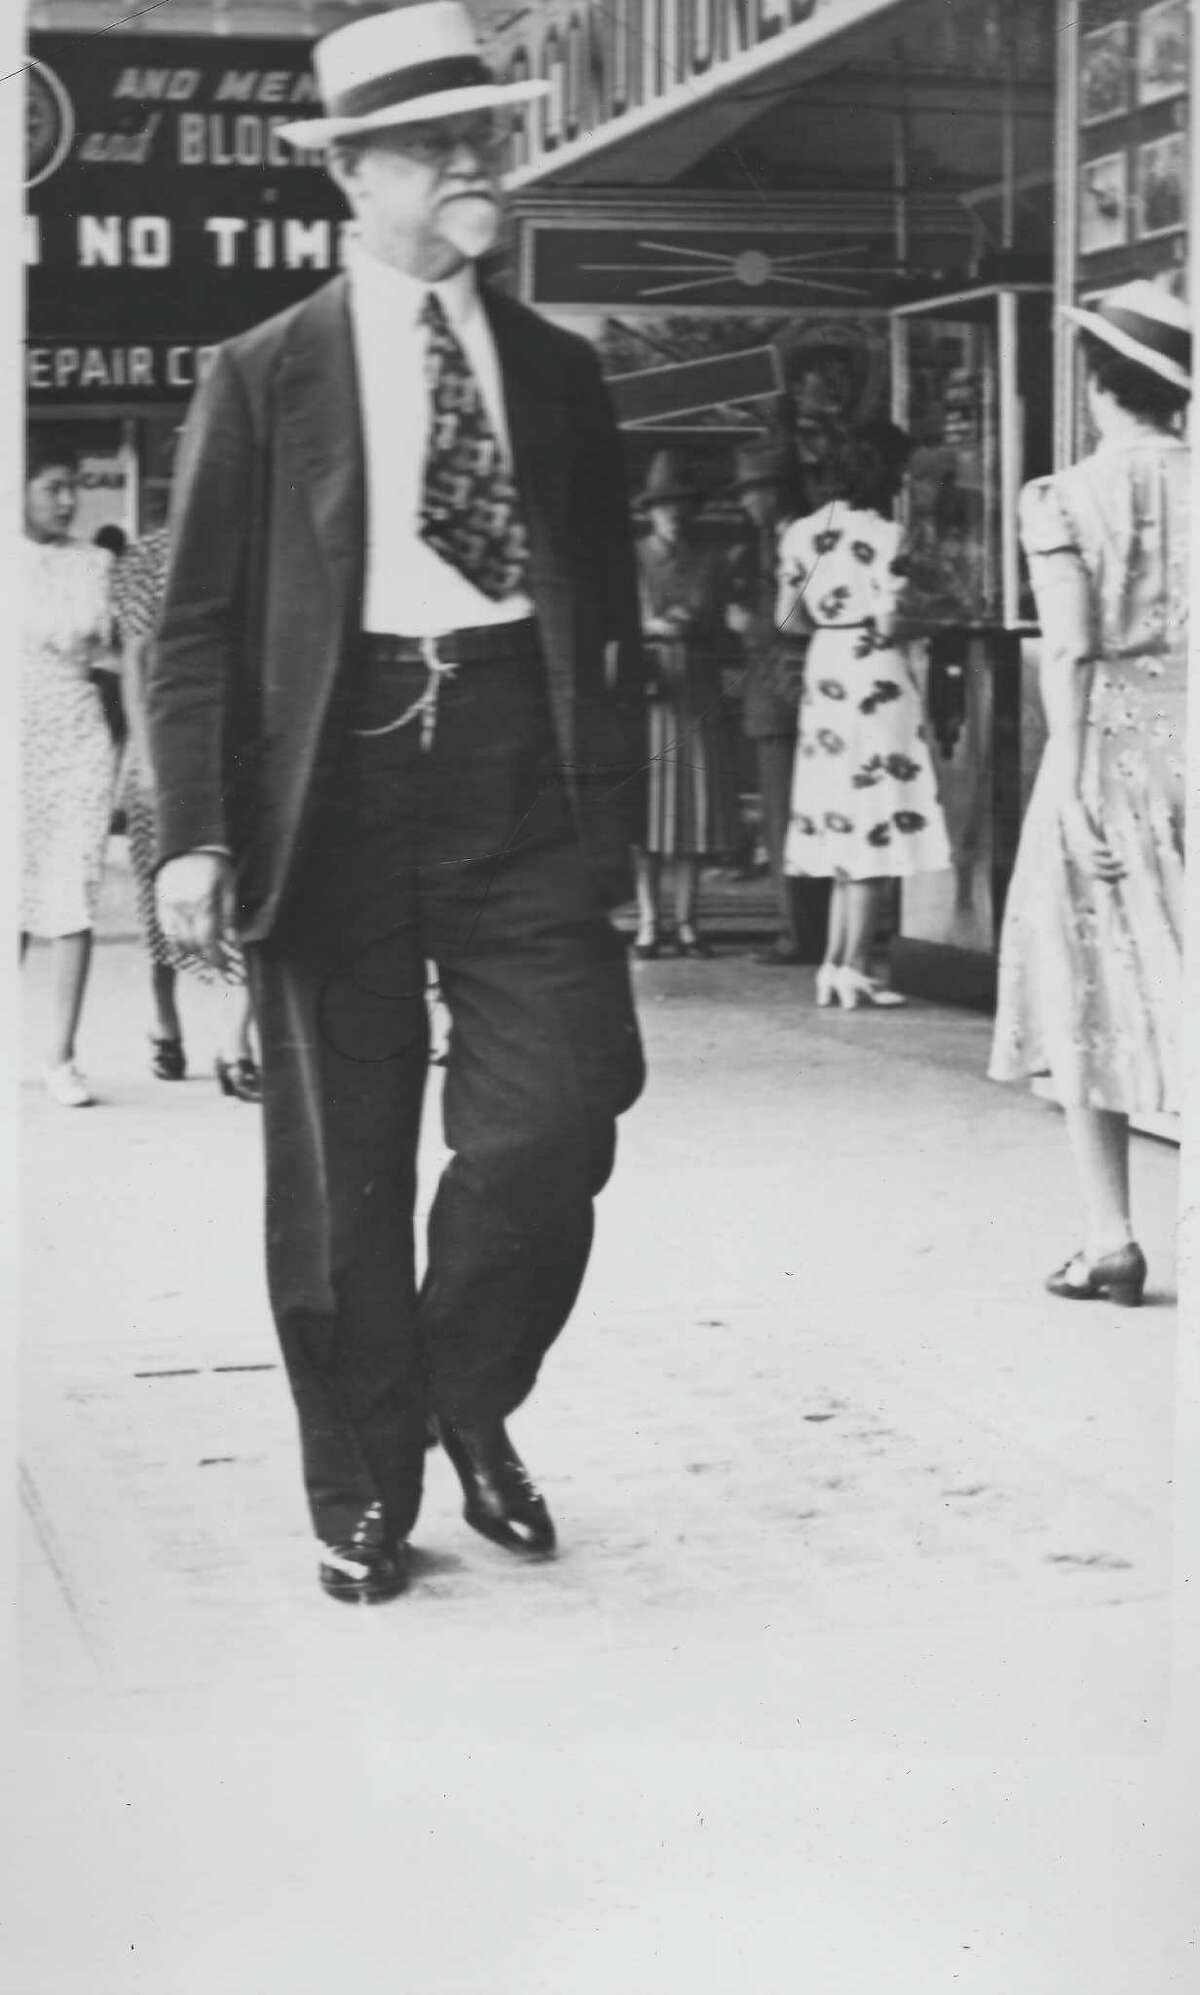 Edward W. Heusinger walks down Houston Street in downtown San Antonio in this undated photo, taken by a street photographer. A prominent businessman and author, Heusinger headed the Committee of 100, a group of volunteer "citizen promoters" who organized San Antonio's 1930 bicentennial, celebrating the city's first civilian government.